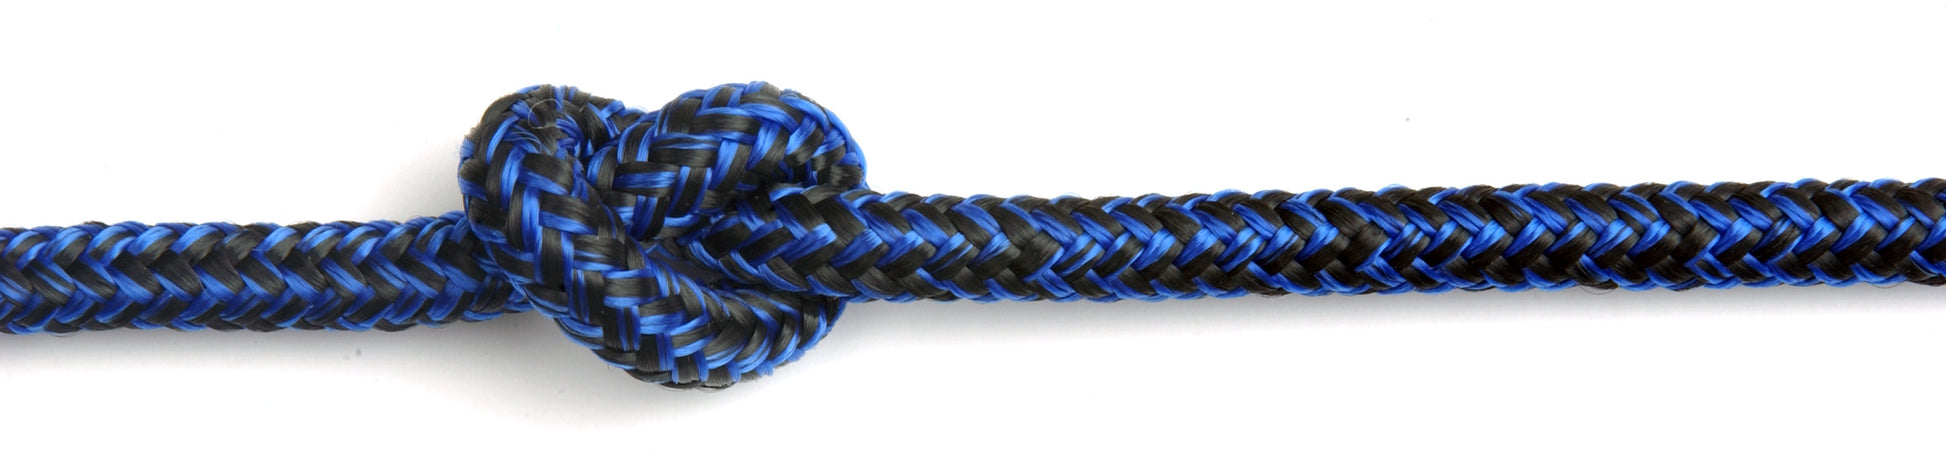 Kingfisher 3.4m x 7mm Evo Sheet rope clearance - Dinghy Shack